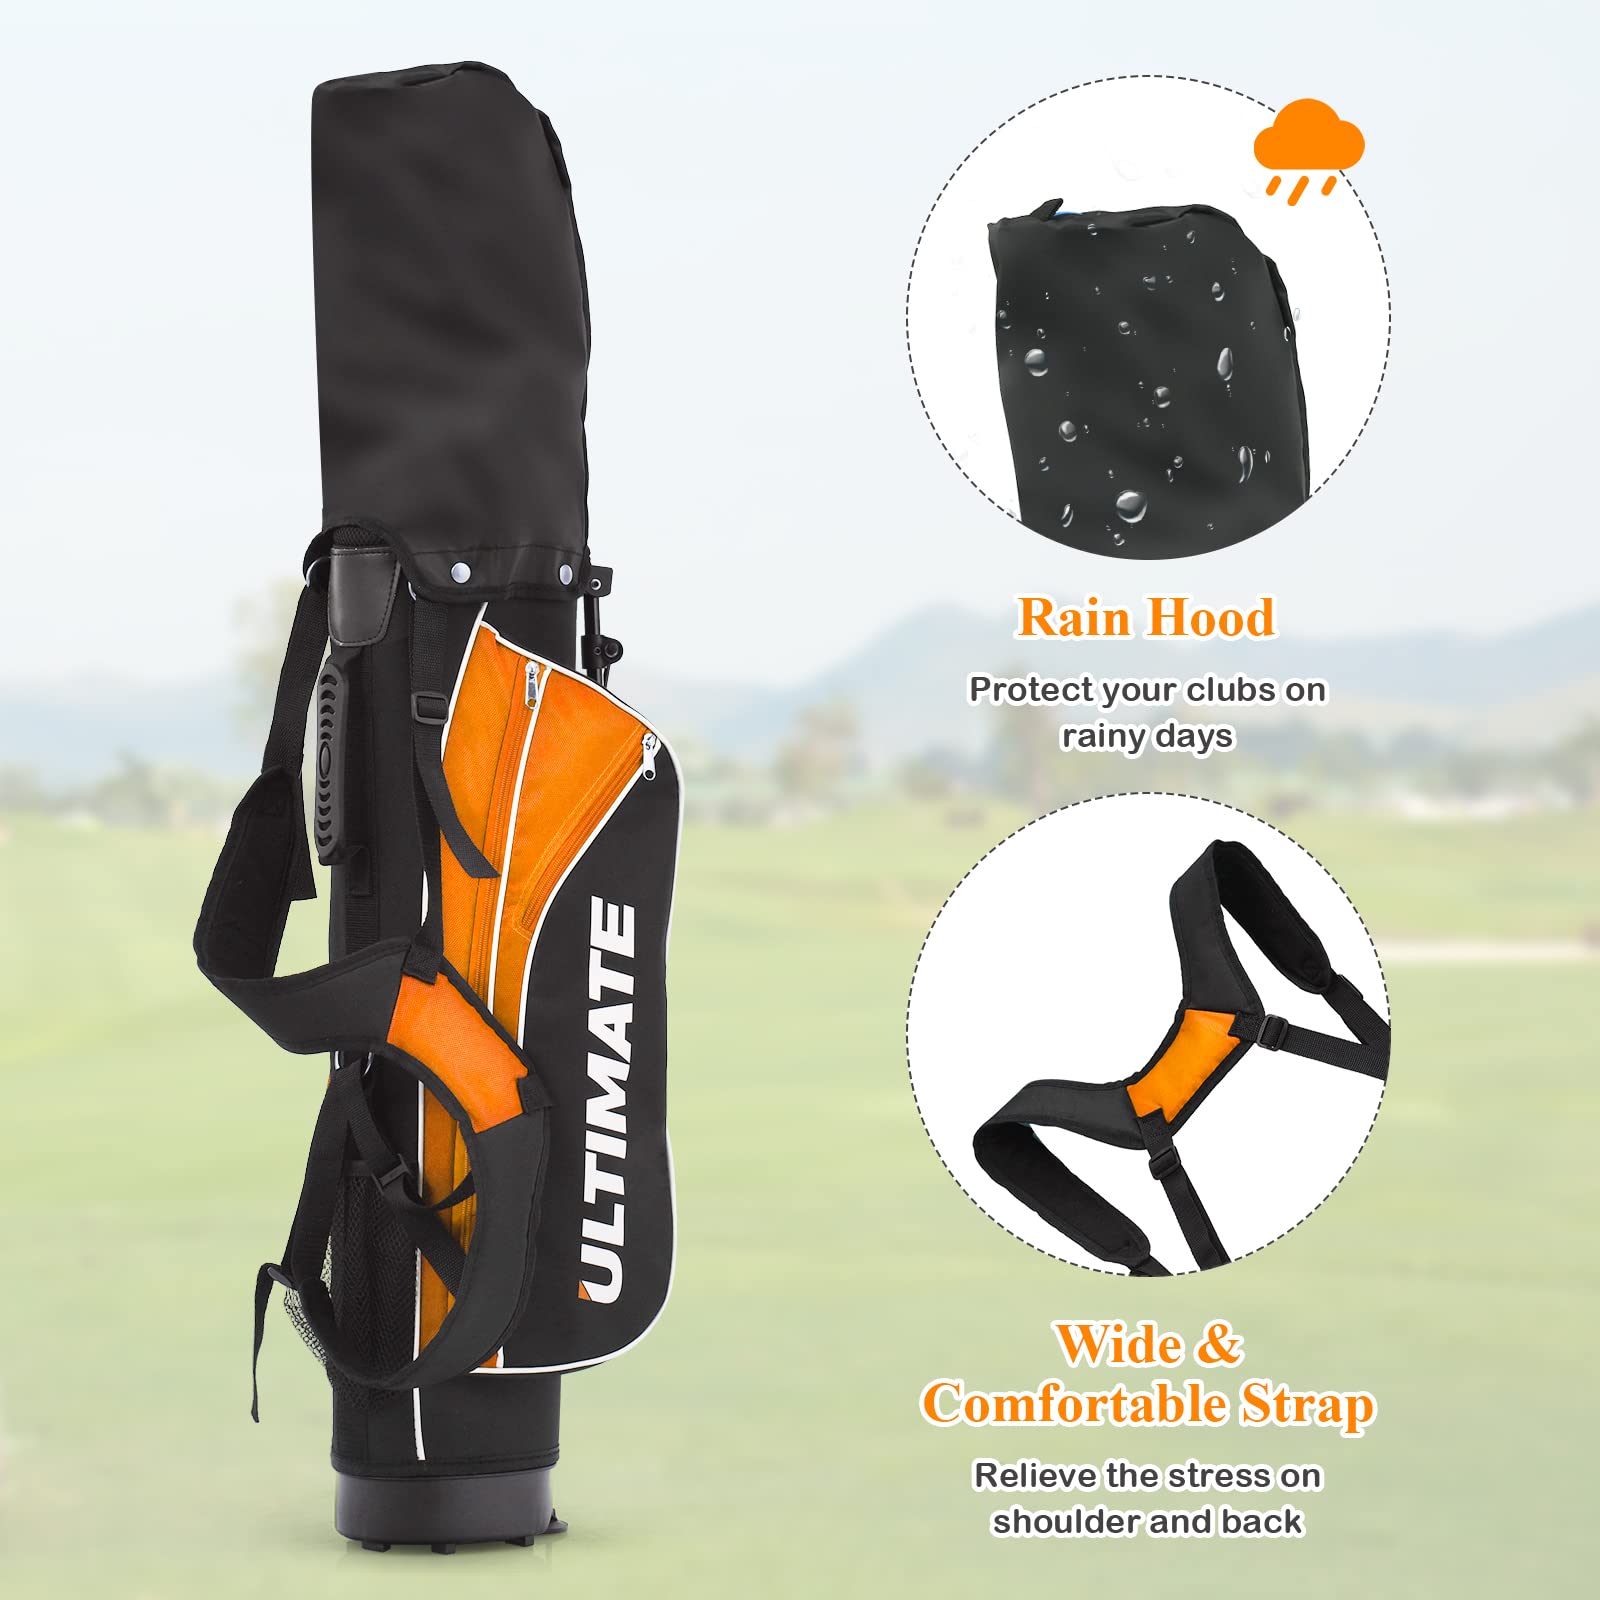 Tangkula Junior Complete Golf Club Set for Children Right Hand, Includes 3# Fairway Wood, 7# & 9# Irons, Putter, Head Cover & Rain Hood, Golf Stand Bag, Perfect for Children, Kids